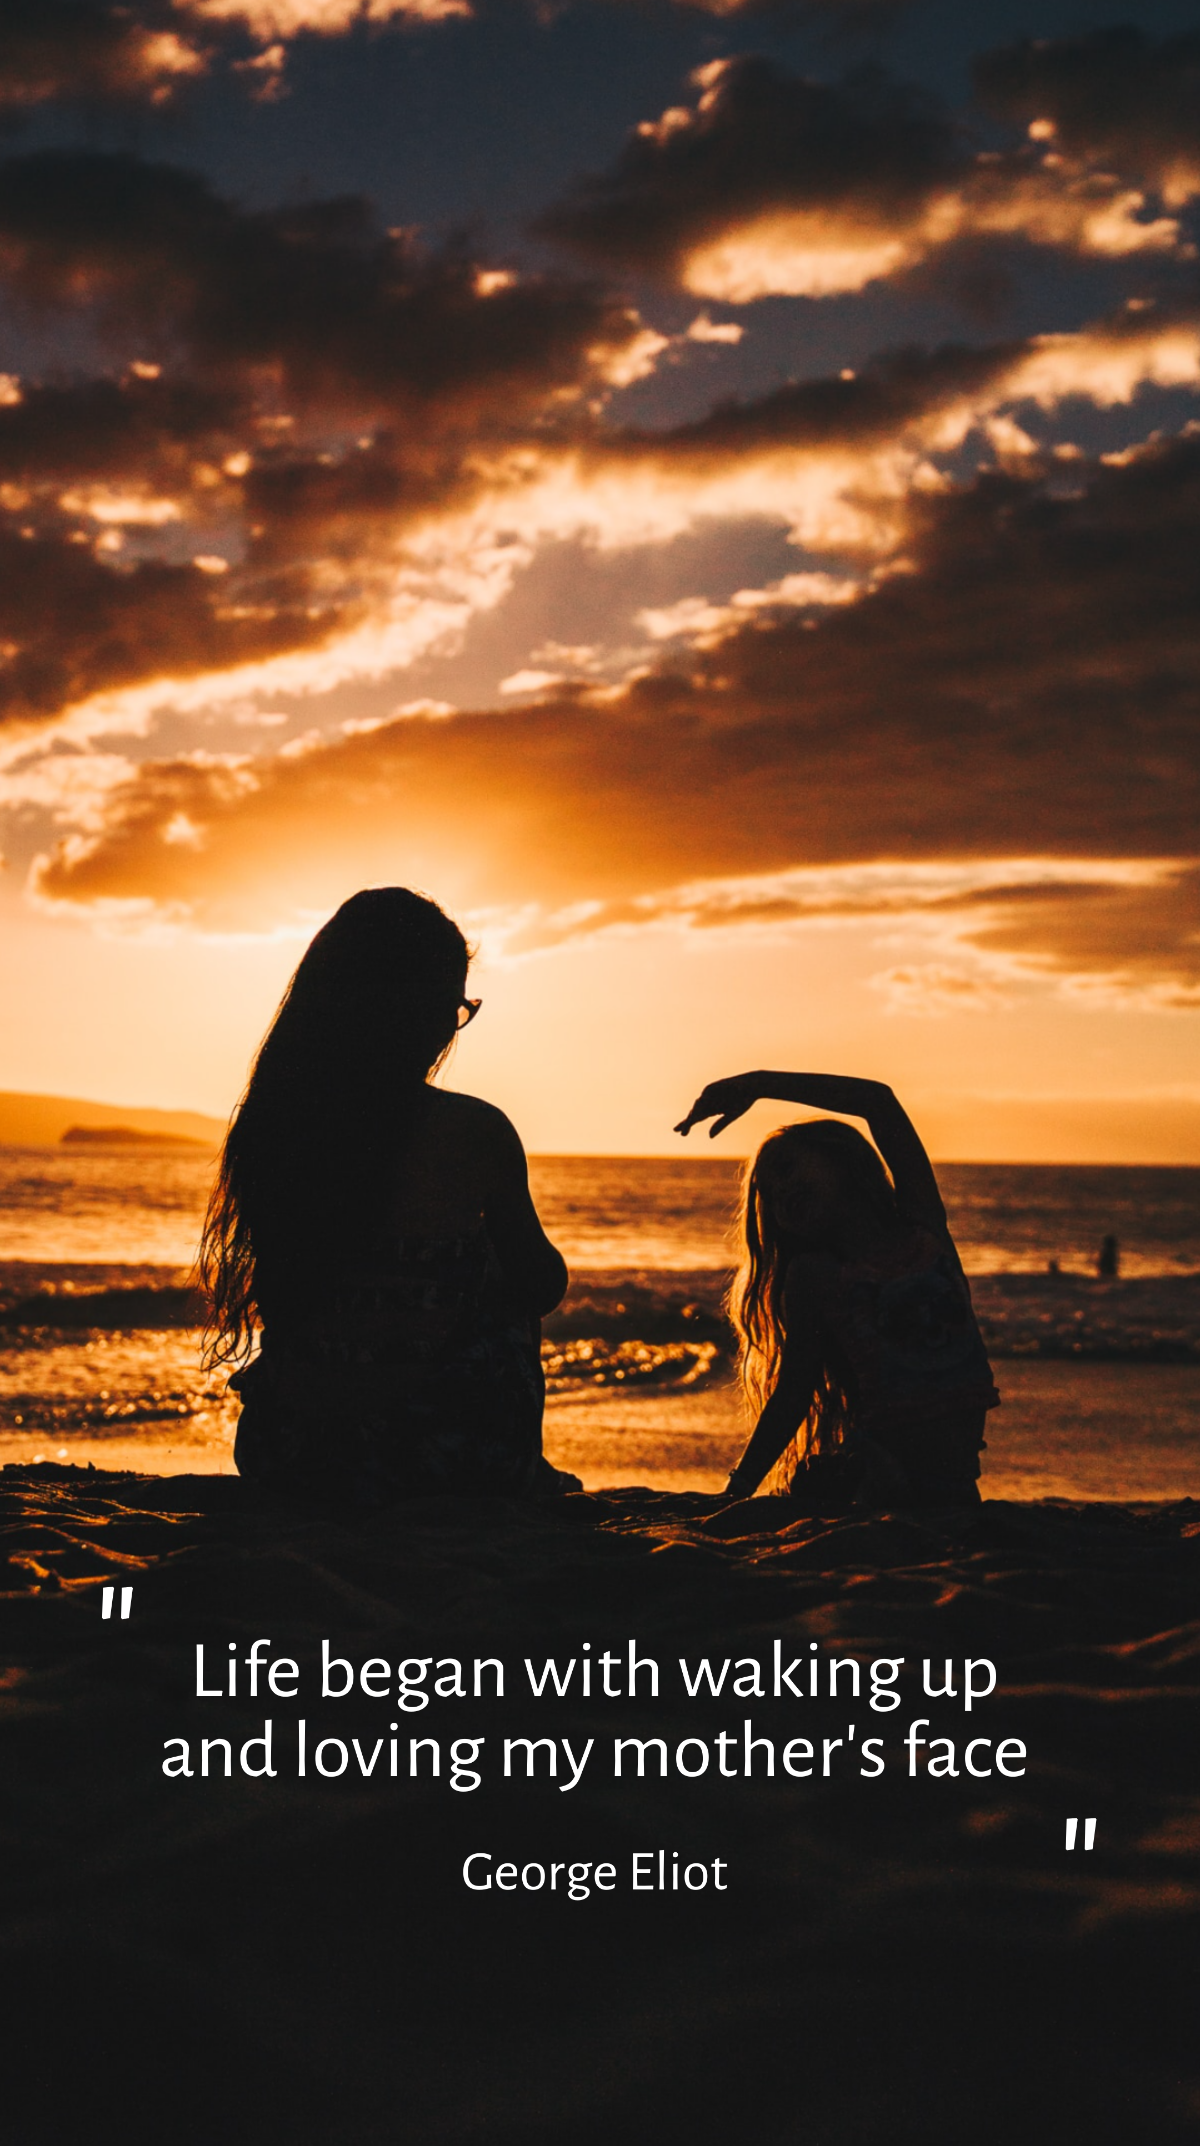 George Eliot - Life began with waking up and loving my mother's face.  Template